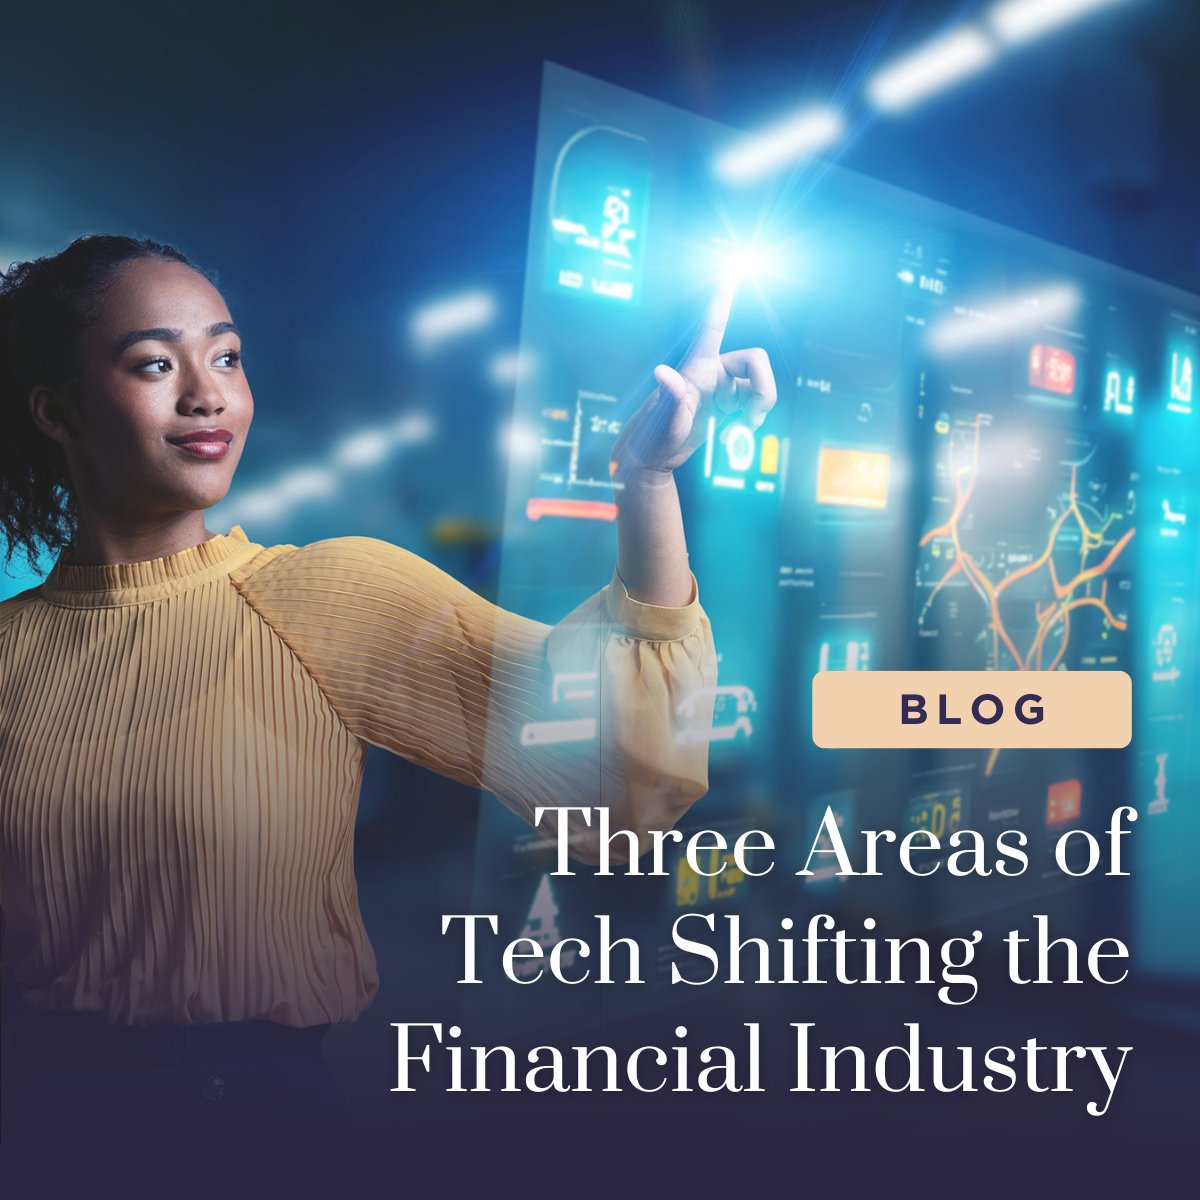 The financial services industry is experiencing rapid change brought about by technological advancements and evolving consumer attitudes.

Here are 3 tech trends shaping the future of finance: dbdnx.co/3y8ZHwp

#bankinginsights #bankingtrends #futureofbanking